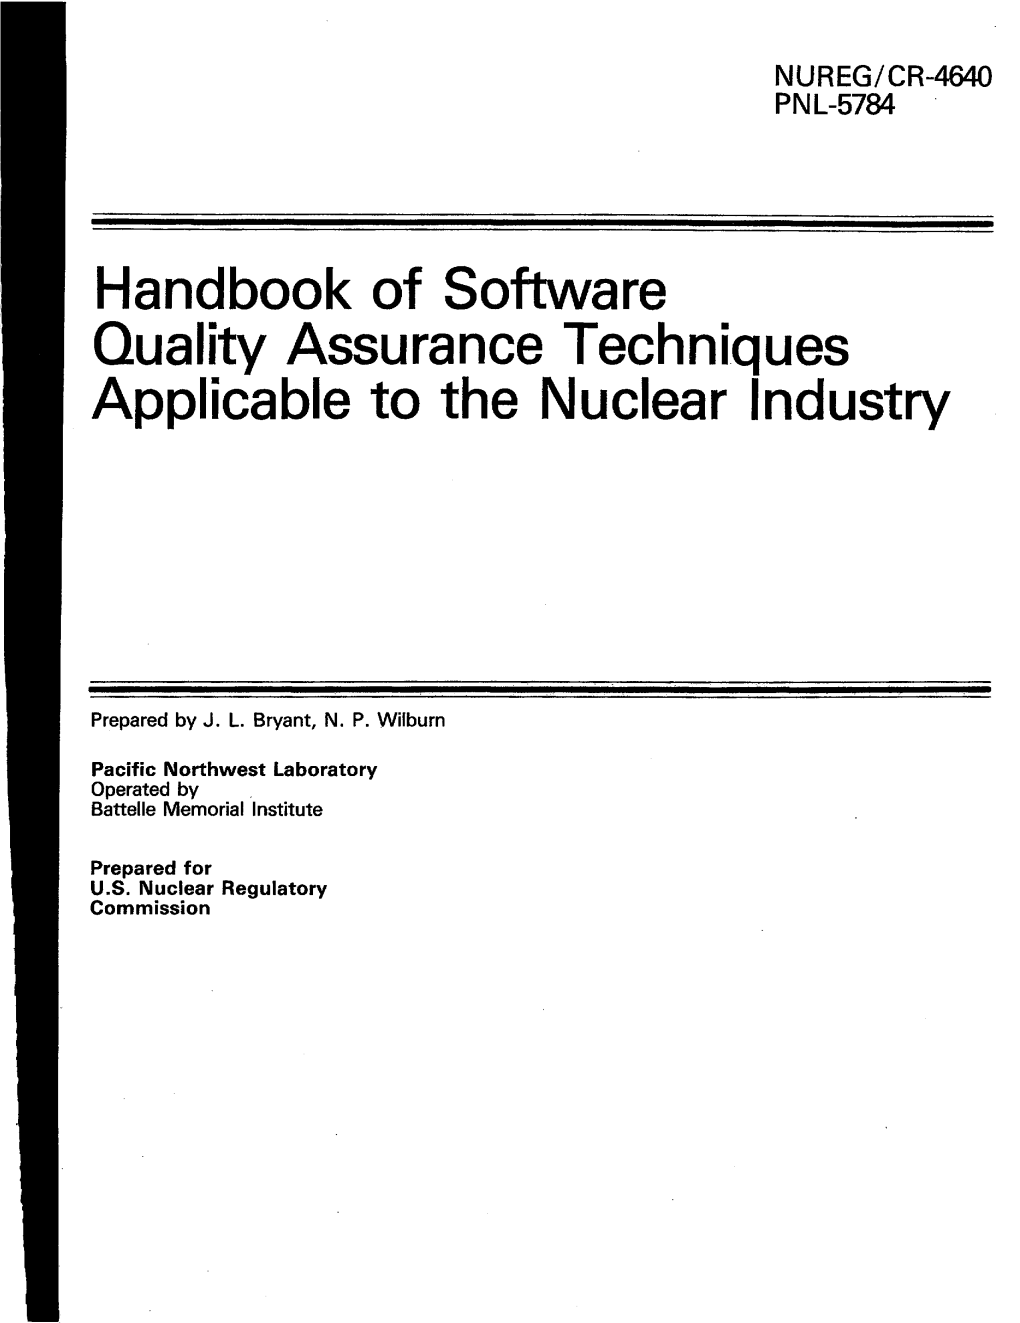 Quality Assurance Techniques Applicable to the Nuclear Industry